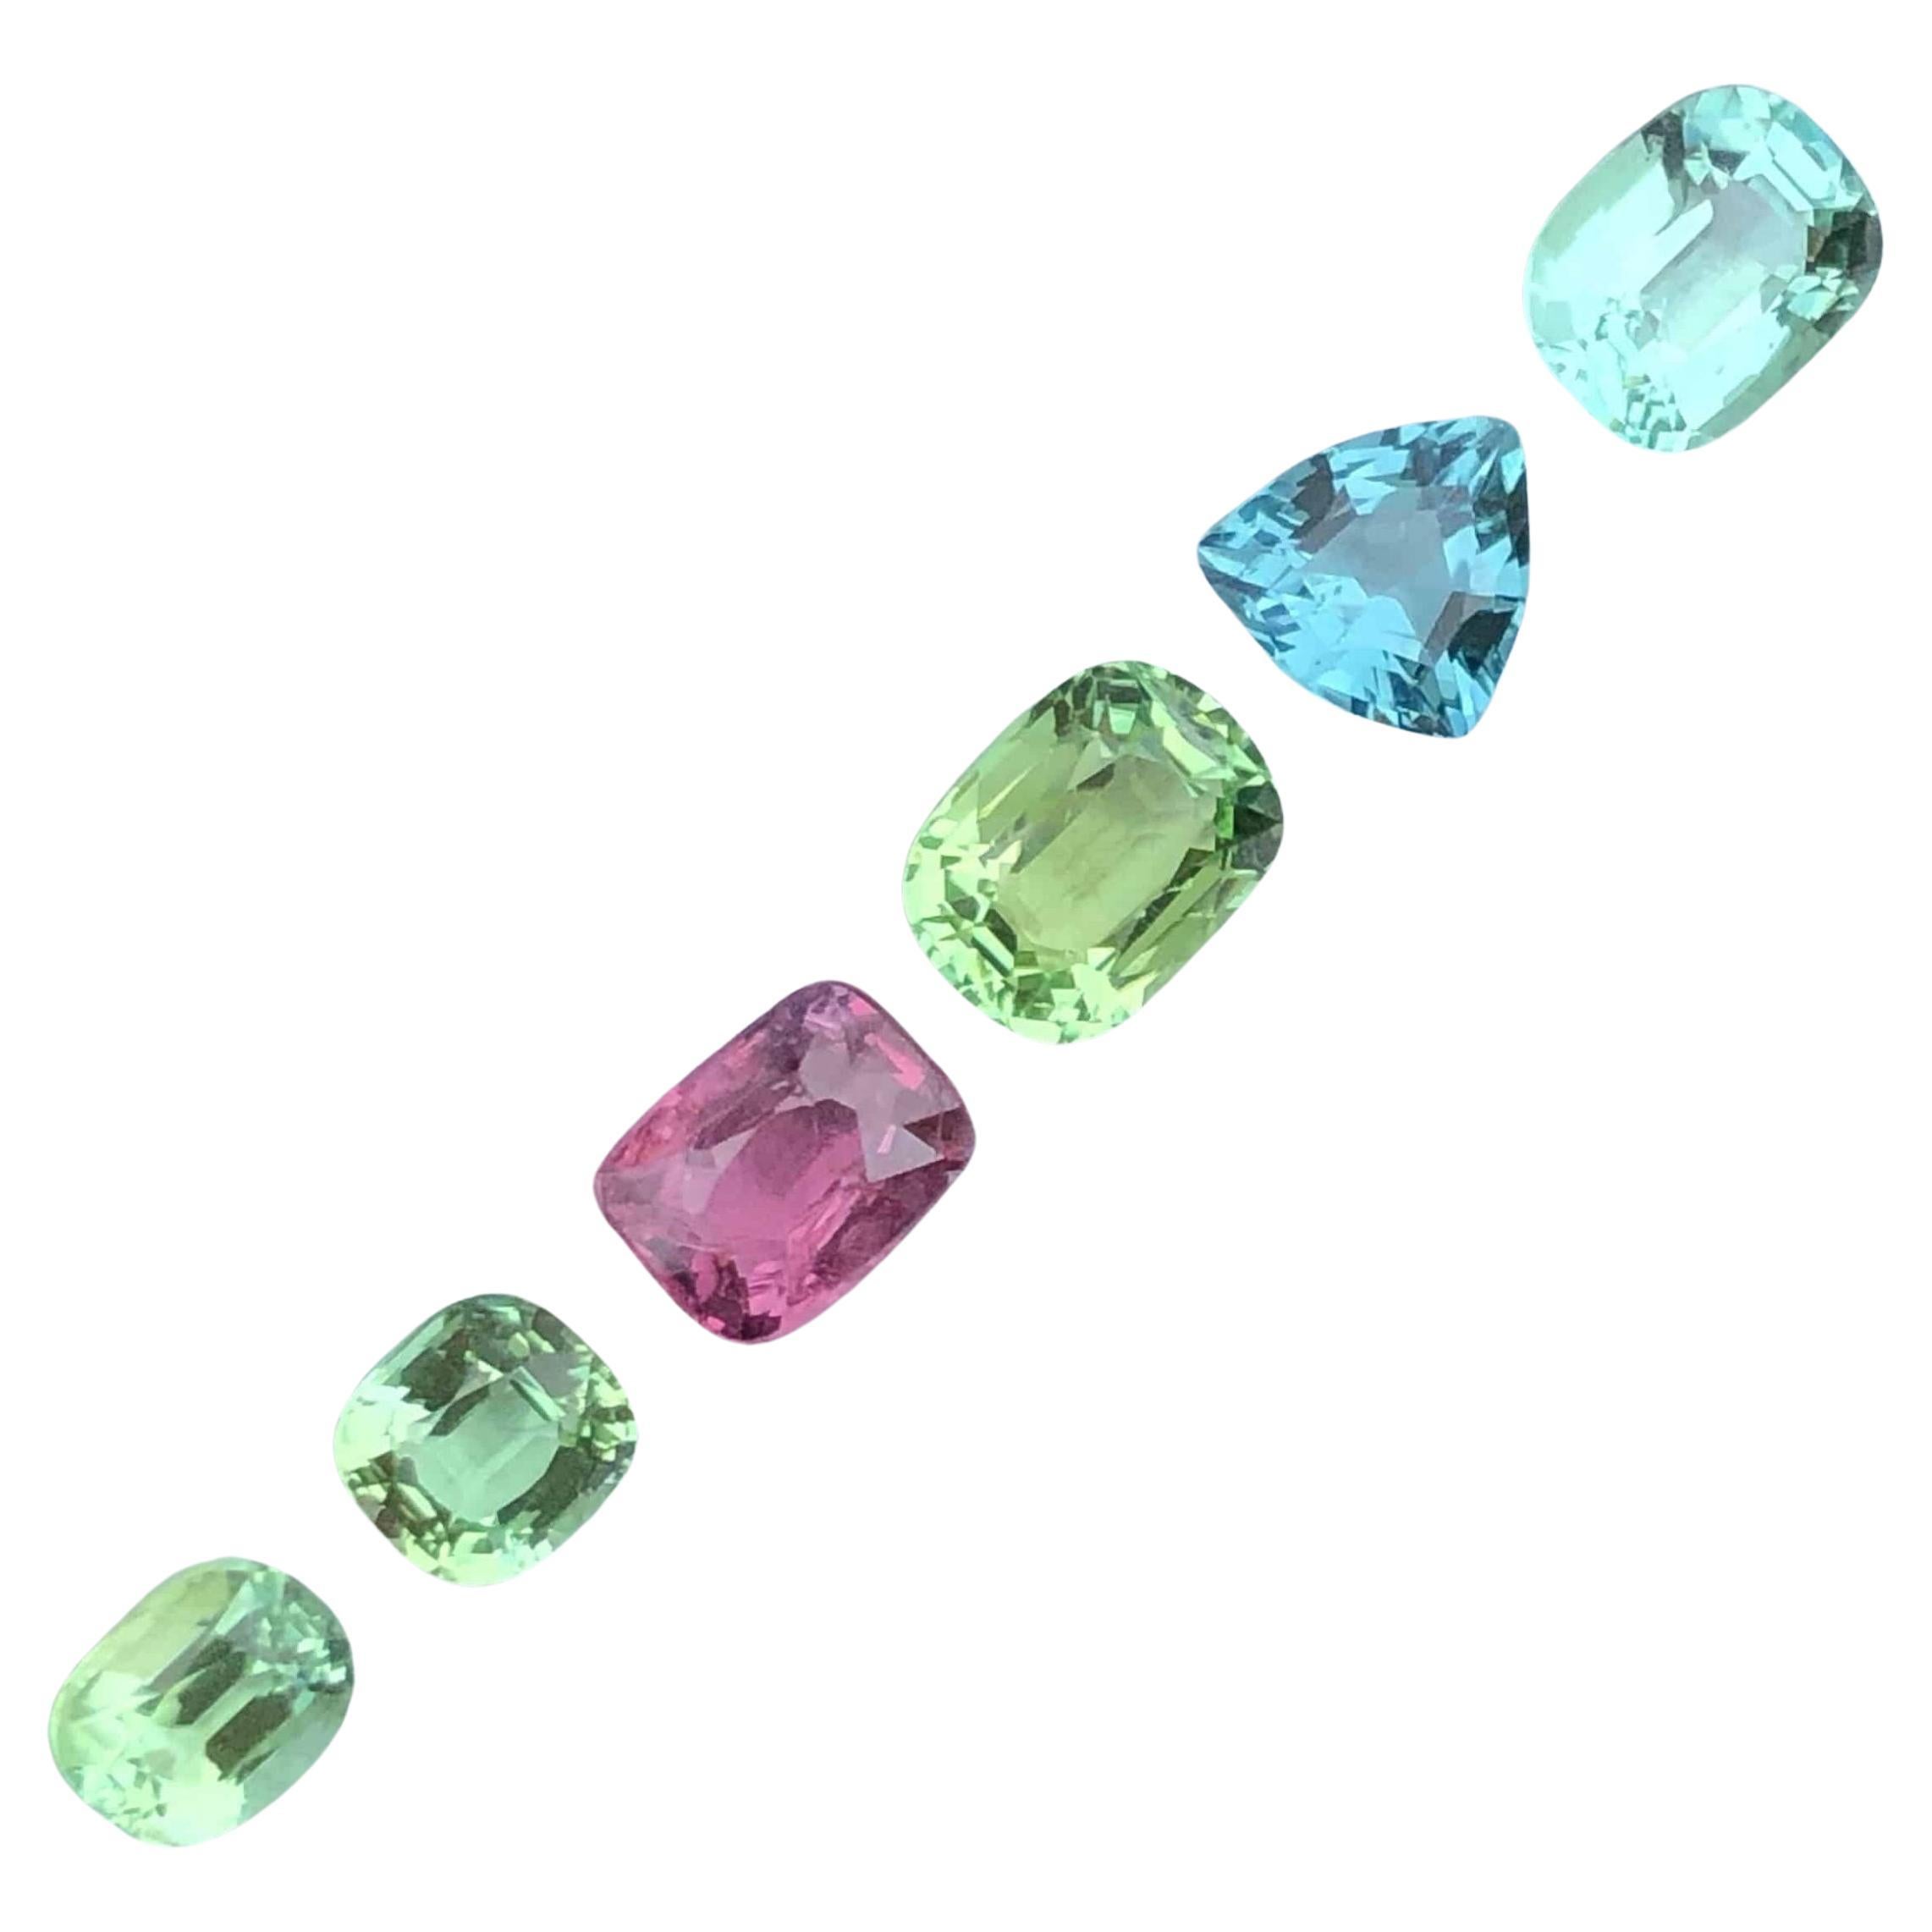 Multi Color Mix Tourmaline Lot 0.45 to 1.05 carats Natural Gems From Afghanistan For Sale